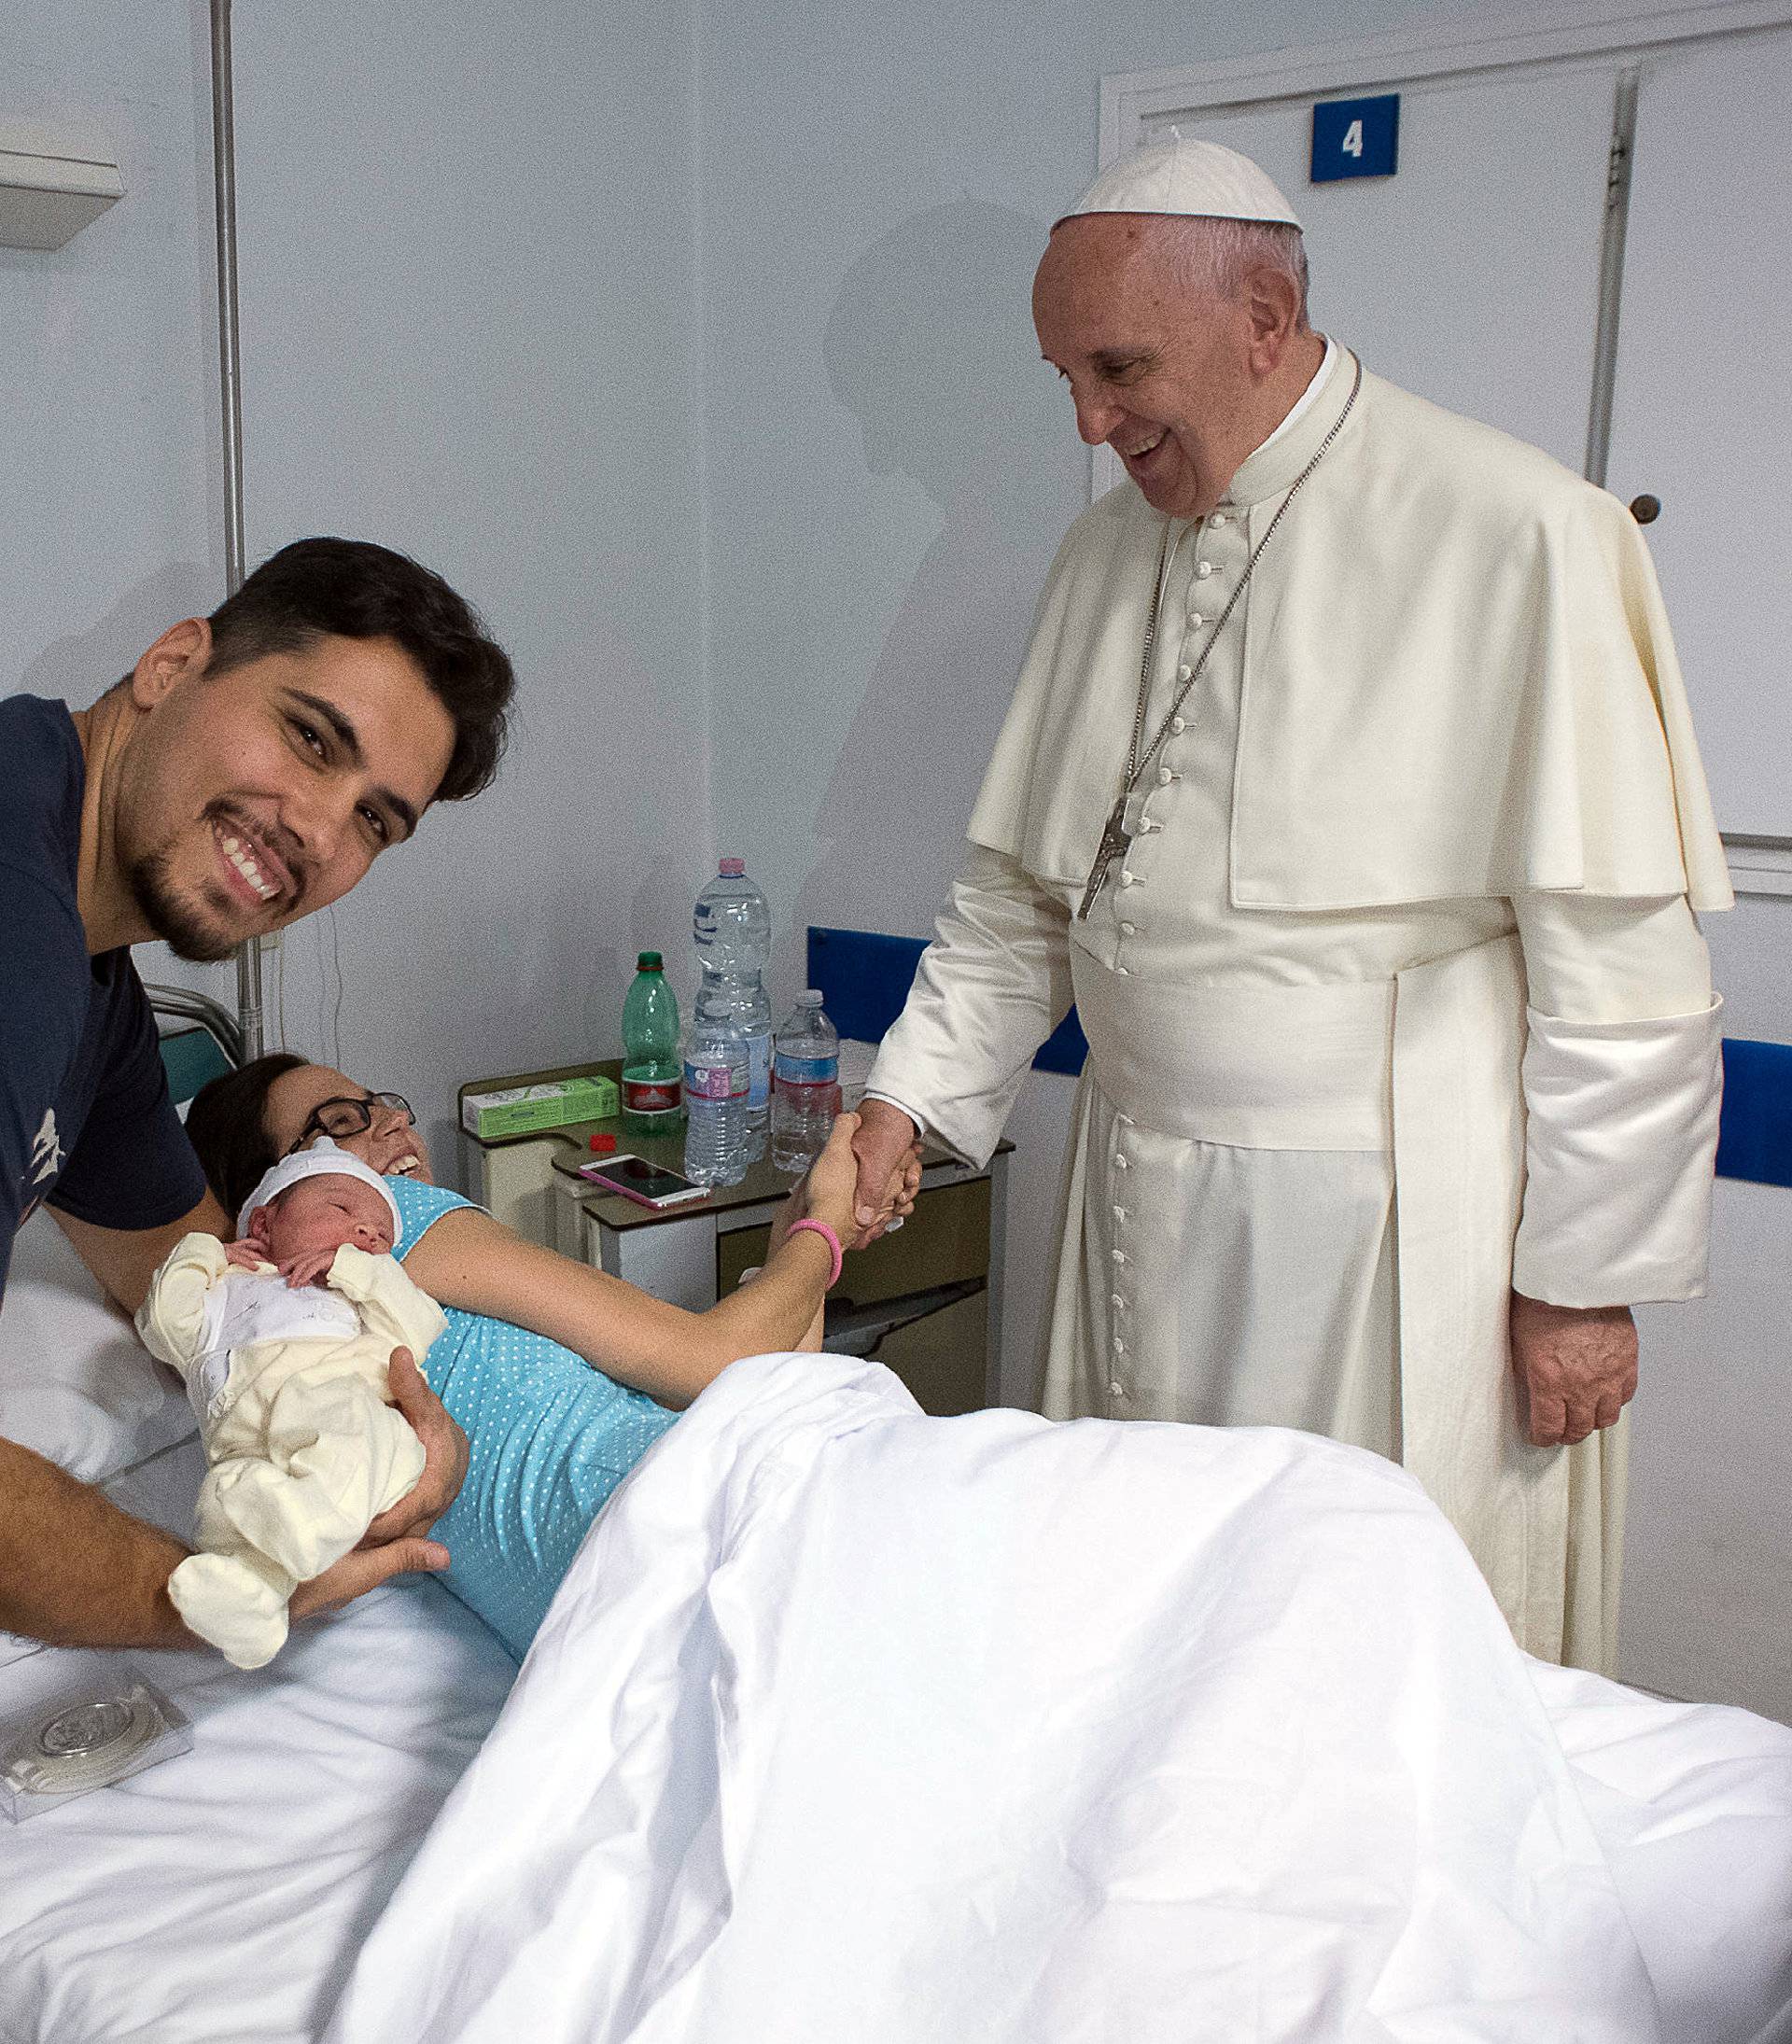 Pope Francis shakes hands to patient as he visits the intensive care nursery at the San Giovanni hospital in Rome